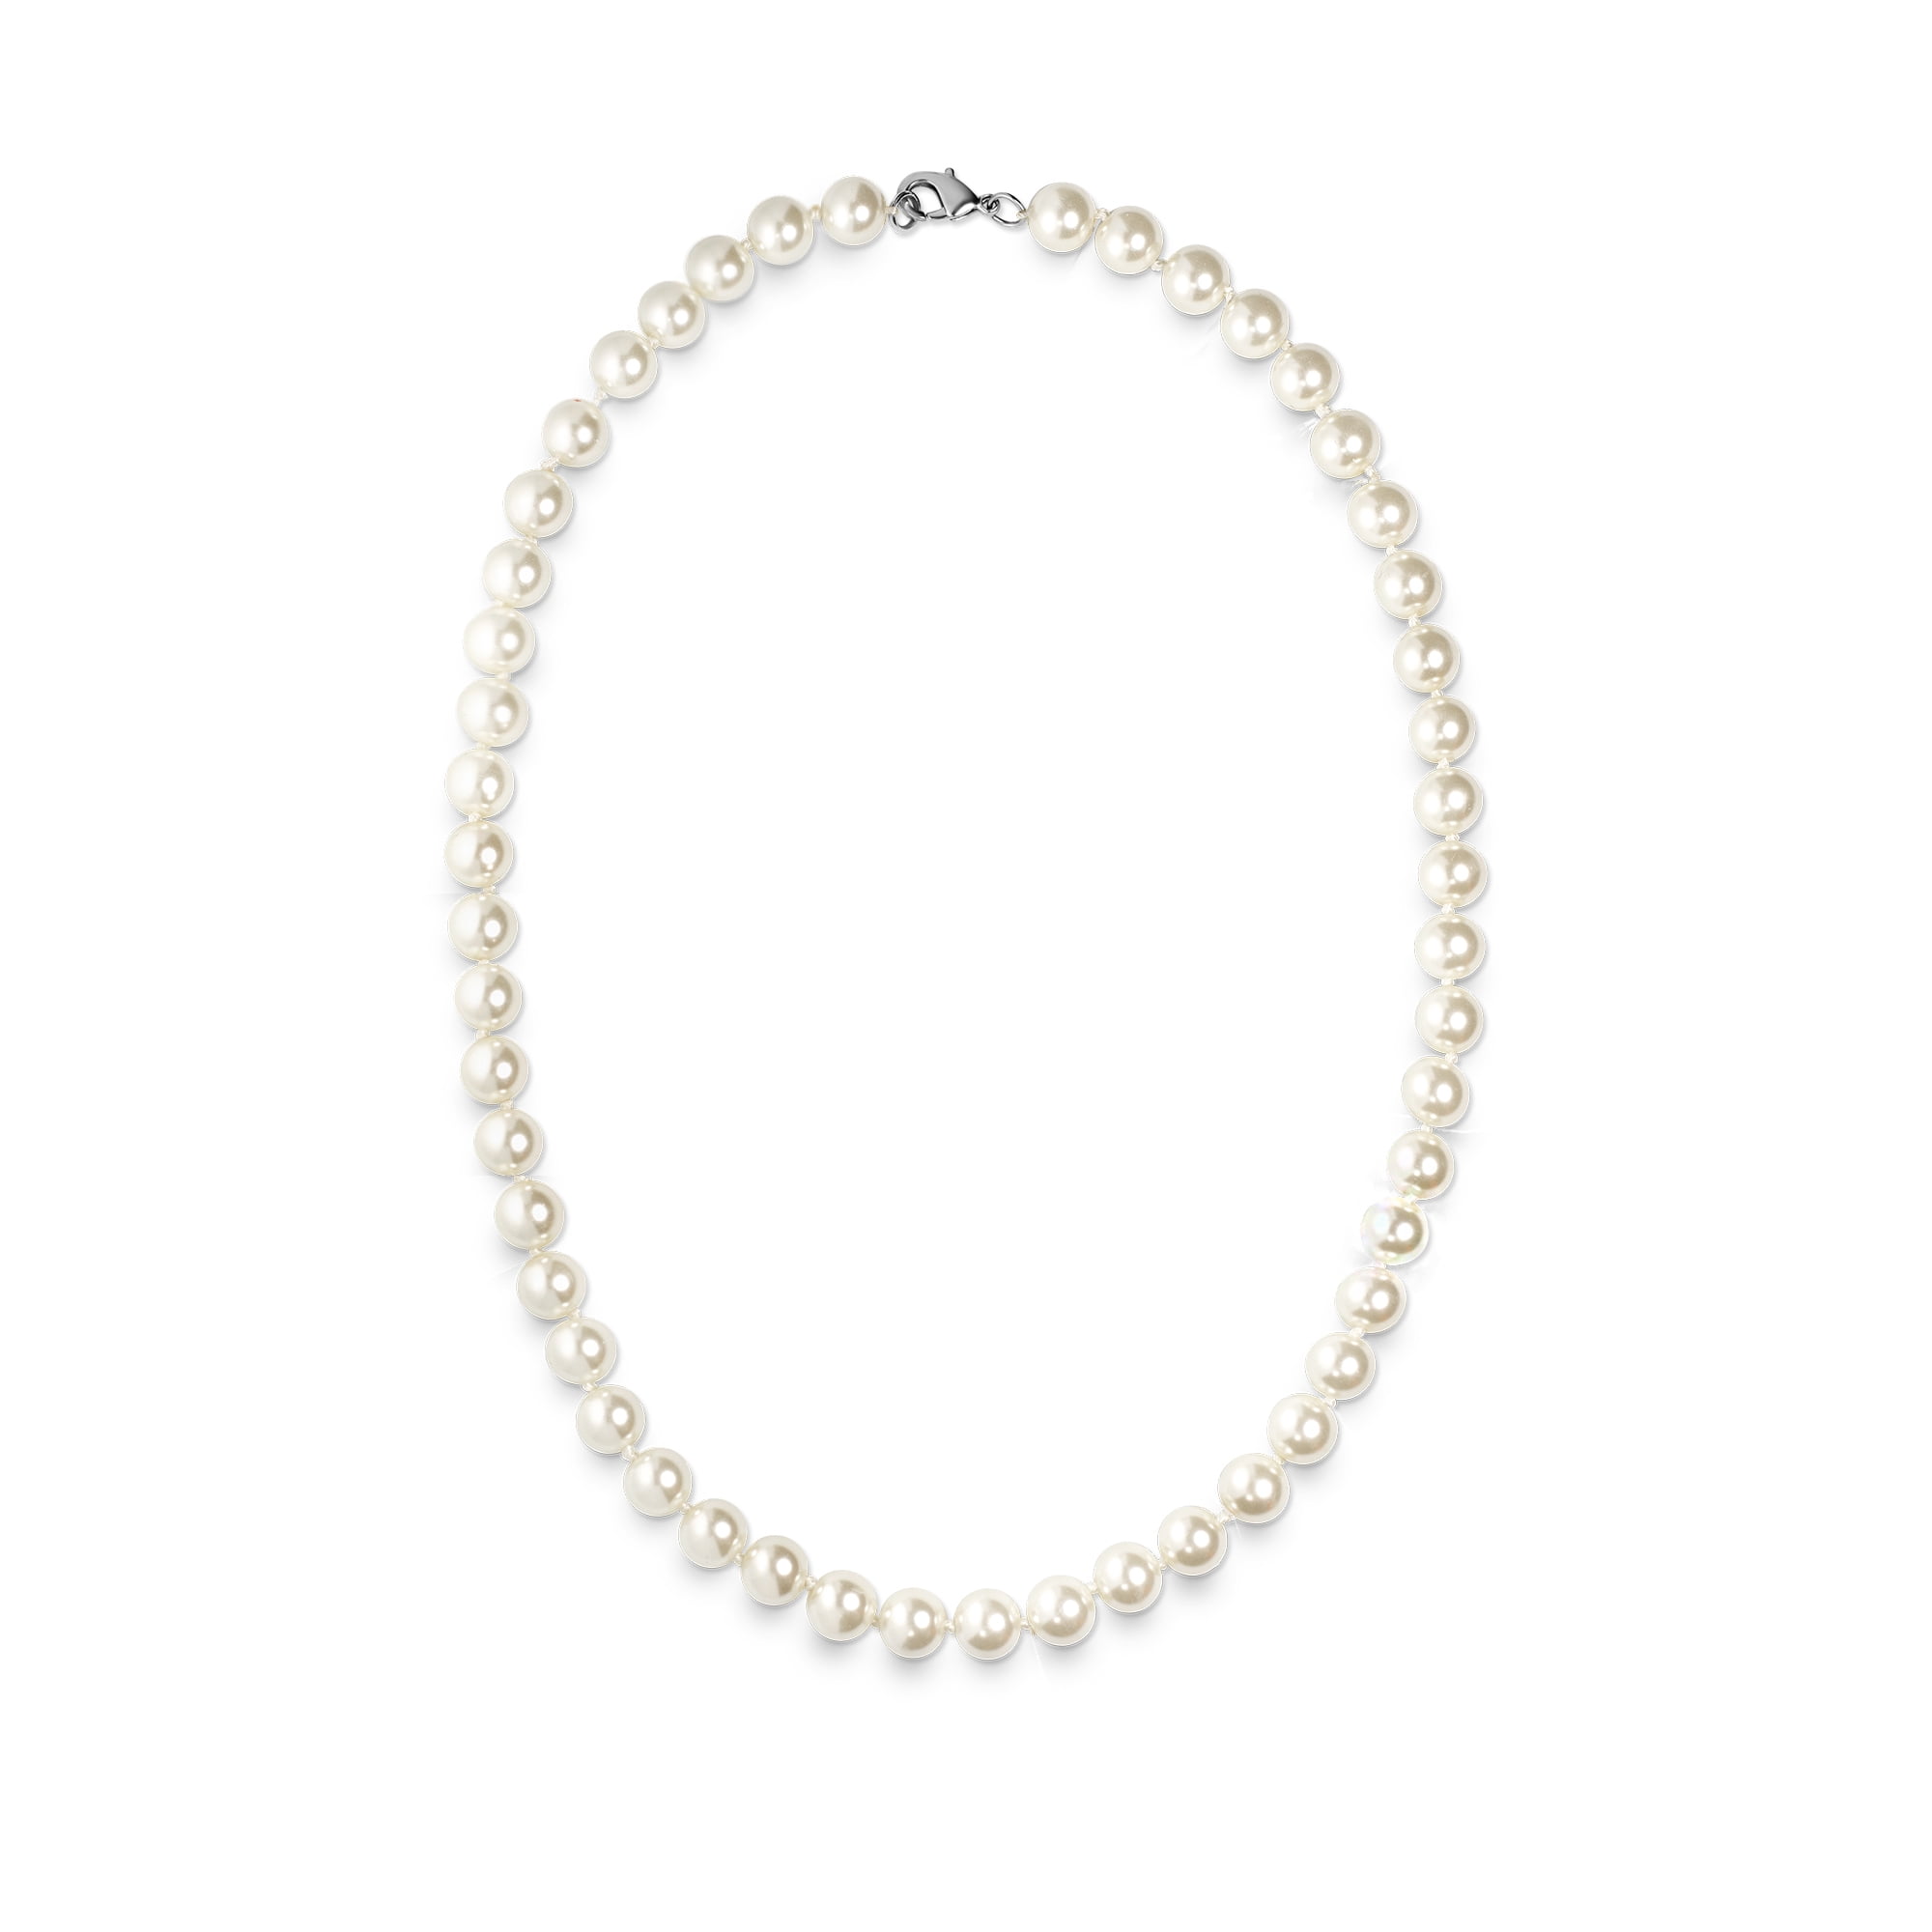 8mm Faux White Pearl Necklace 18"